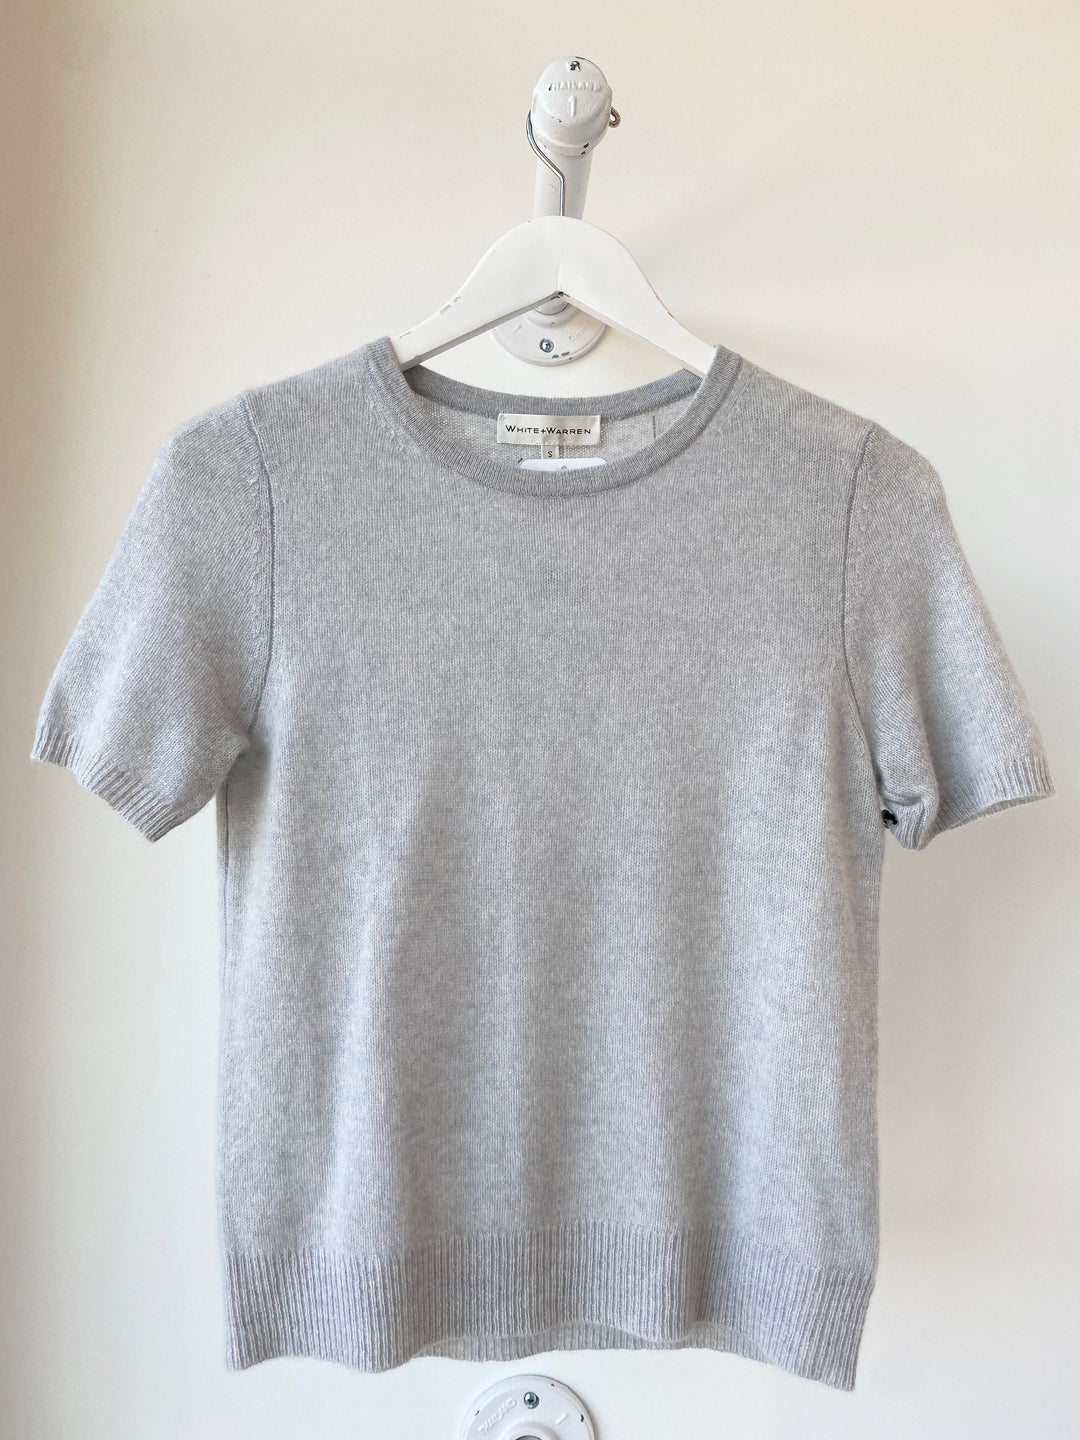 White + Warren - Fitted Tee Bluebell Heather